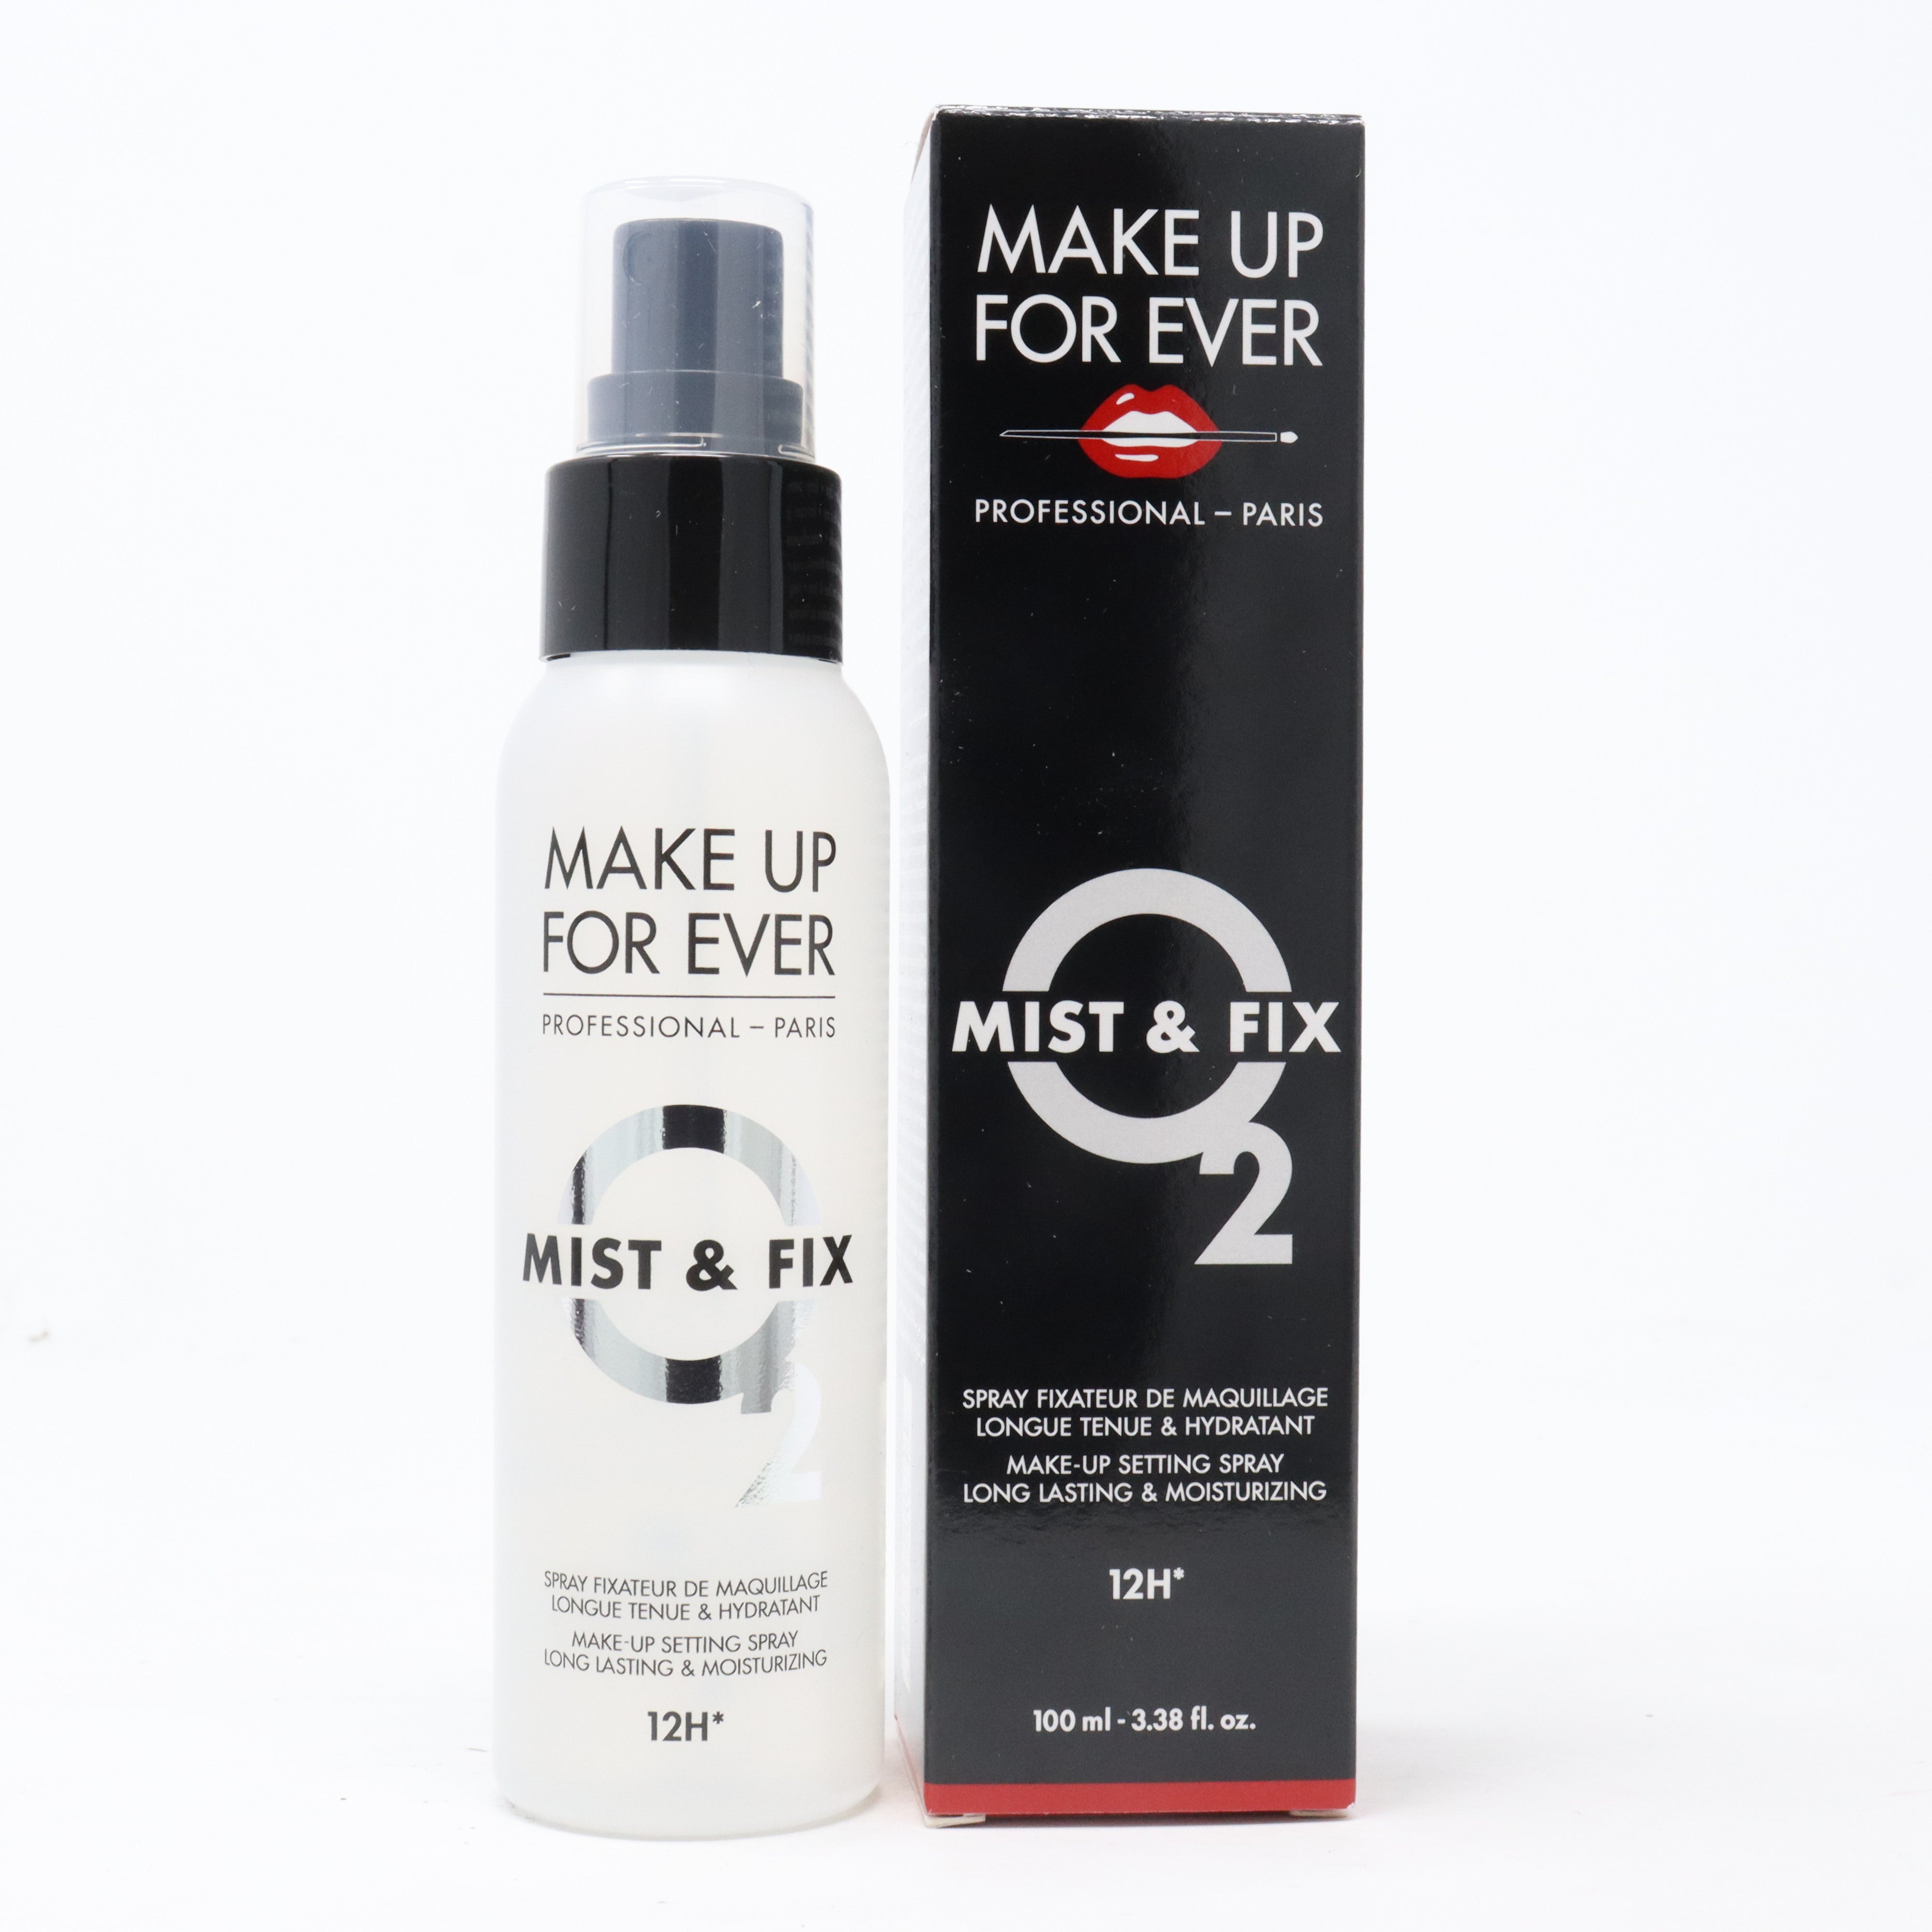 Make Up For Ever Mist & Fix Makeup Setting Spray 3.38oz/100ml New With Box